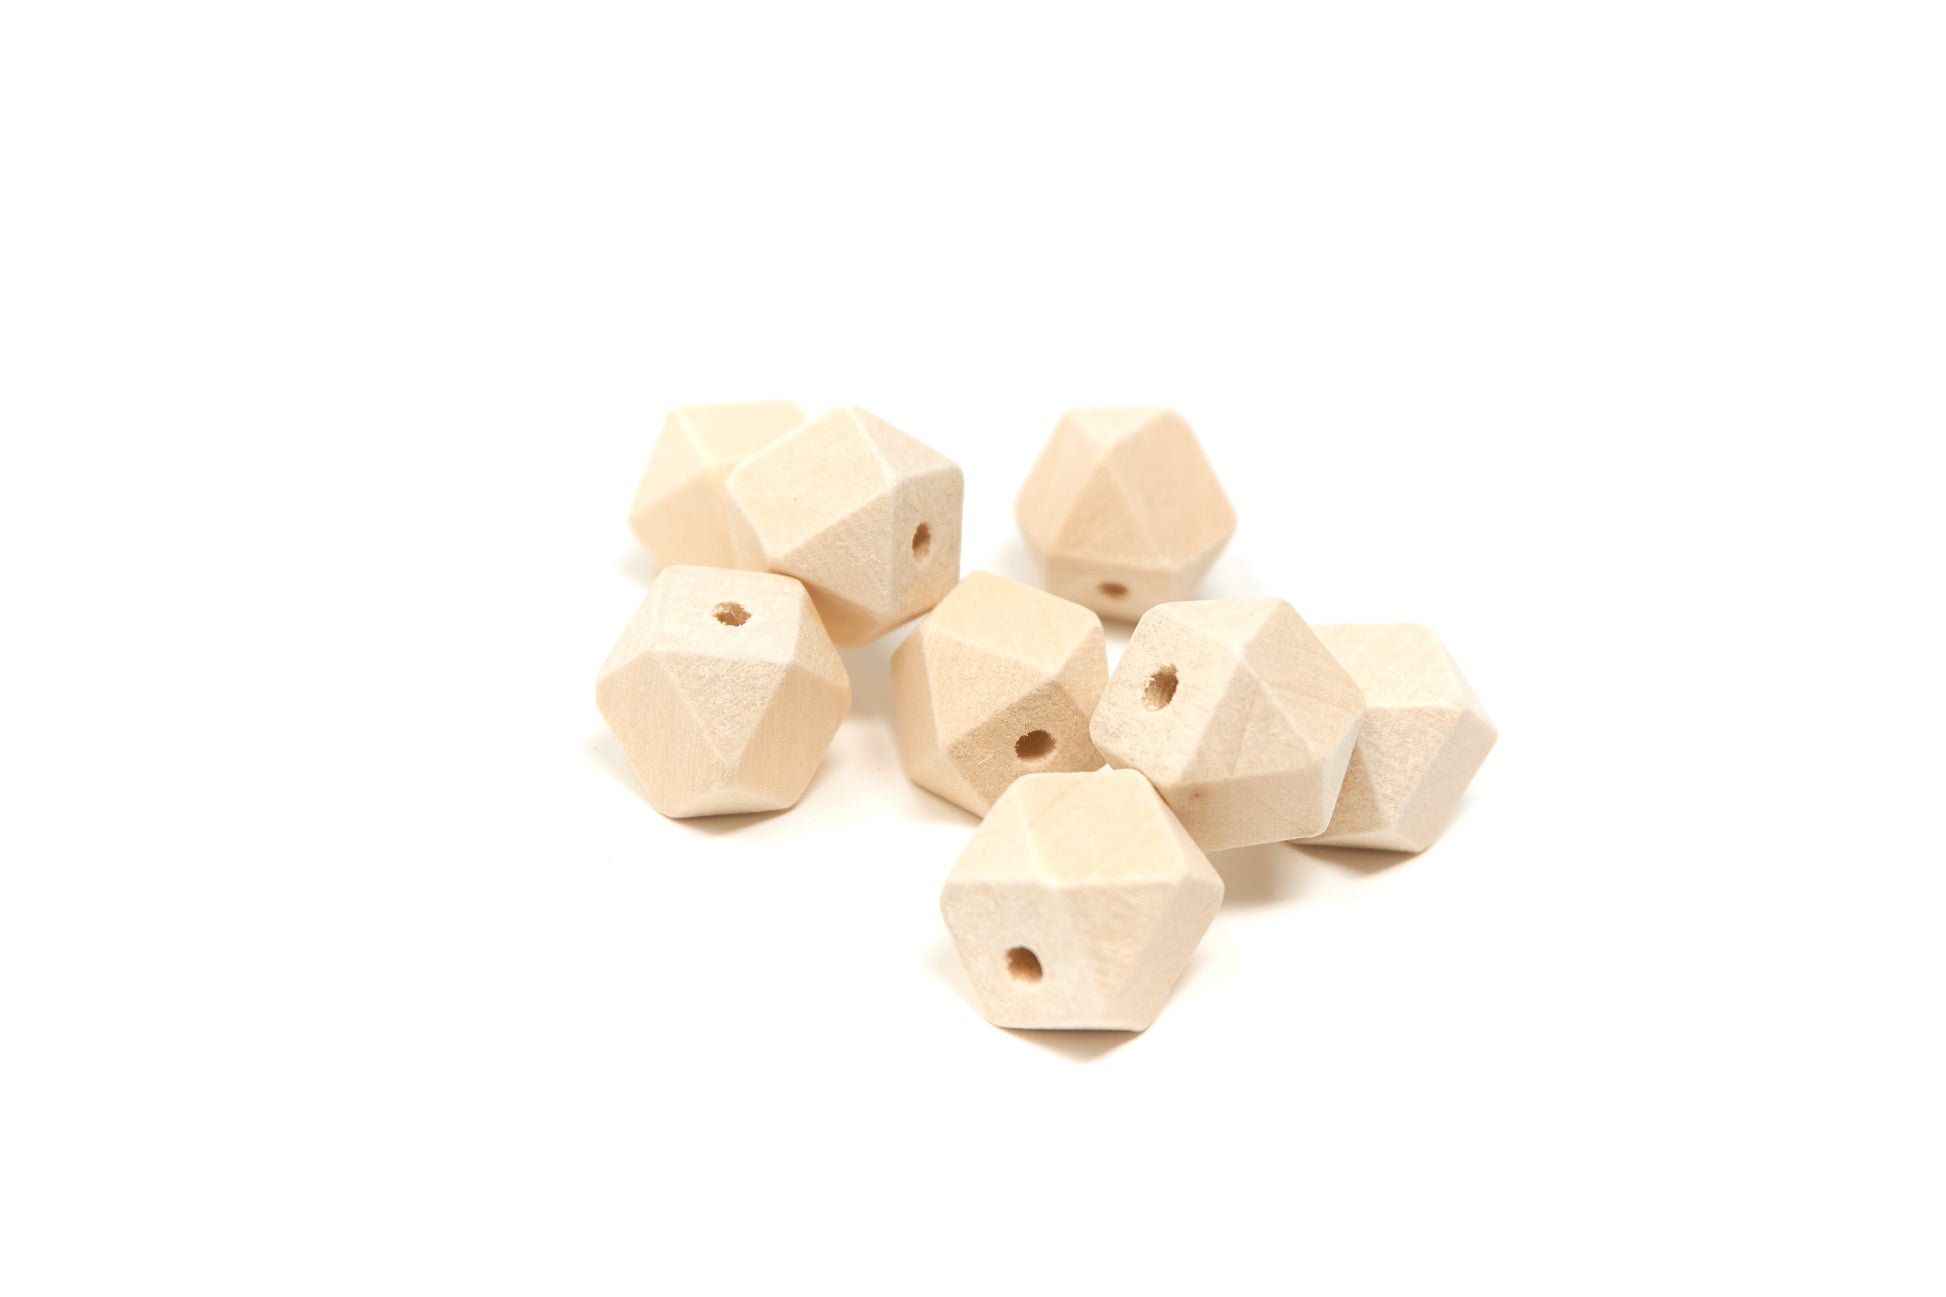 Natural Round Wood Beads 14x18mm 50 pieces - Cameos Art Shop